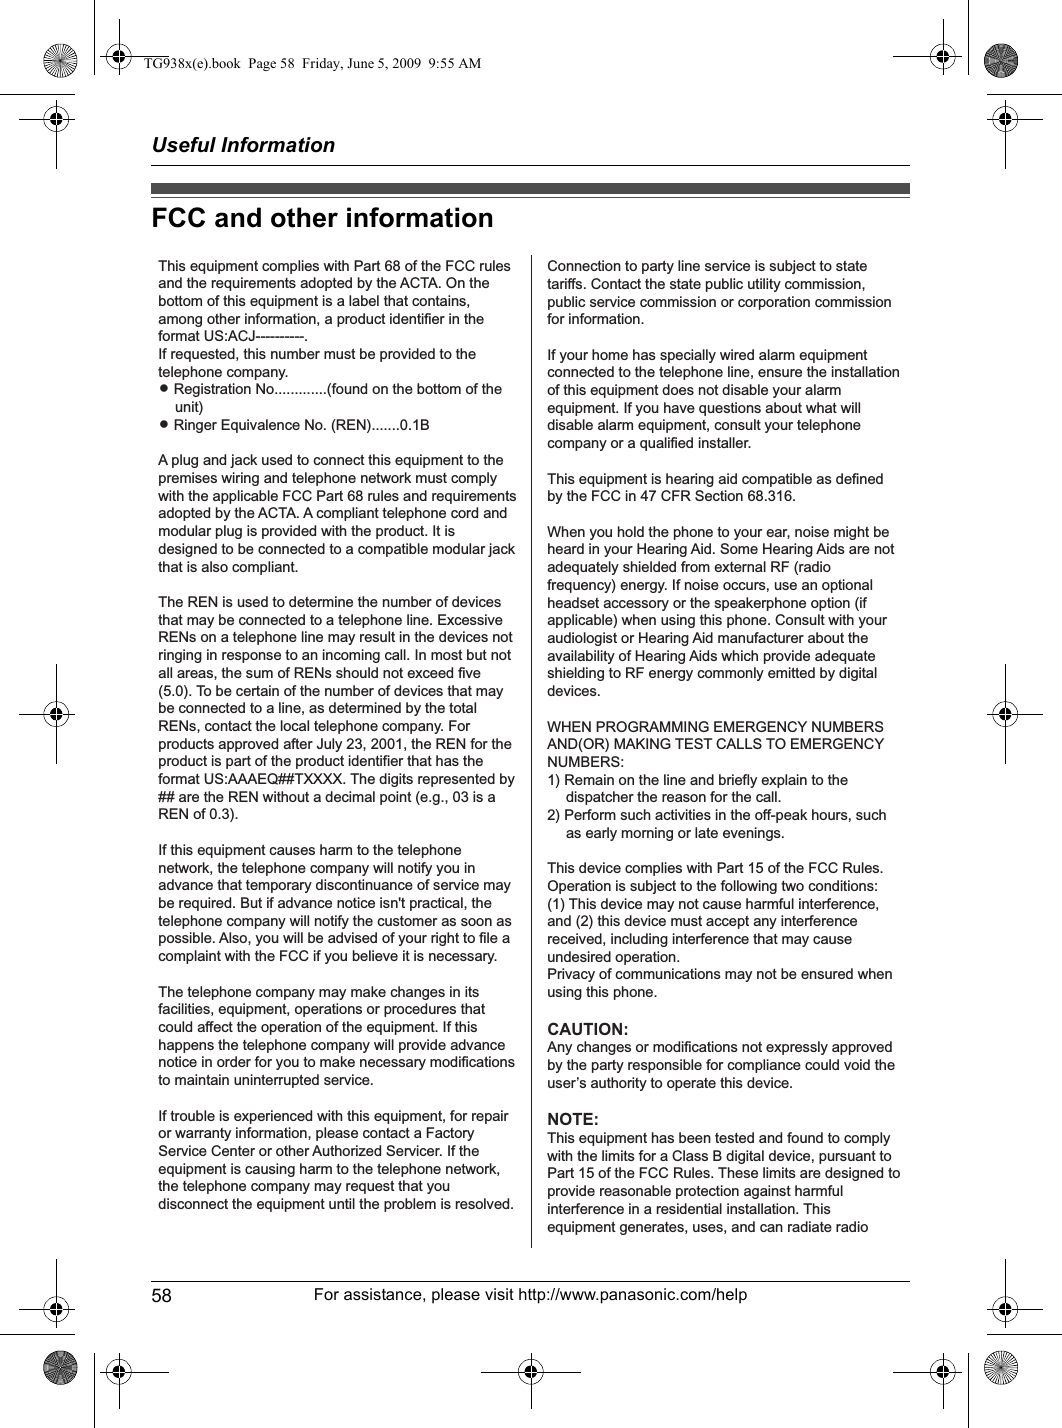 Useful Information58 For assistance, please visit http://www.panasonic.com/helpFCC and other informationThis equipment complies with Part 68 of the FCC rules and the requirements adopted by the ACTA. On the bottom of this equipment is a label that contains, among other information, a product identifier in the format US:ACJ----------.If requested, this number must be provided to the telephone company.L Registration No.............(found on the bottom of the unit)L Ringer Equivalence No. (REN).......0.1BA plug and jack used to connect this equipment to the premises wiring and telephone network must comply with the applicable FCC Part 68 rules and requirements adopted by the ACTA. A compliant telephone cord and modular plug is provided with the product. It is designed to be connected to a compatible modular jack that is also compliant.The REN is used to determine the number of devices that may be connected to a telephone line. Excessive RENs on a telephone line may result in the devices not ringing in response to an incoming call. In most but not all areas, the sum of RENs should not exceed five (5.0). To be certain of the number of devices that may be connected to a line, as determined by the total RENs, contact the local telephone company. For products approved after July 23, 2001, the REN for the product is part of the product identifier that has the format US:AAAEQ##TXXXX. The digits represented by ## are the REN without a decimal point (e.g., 03 is a REN of 0.3).If this equipment causes harm to the telephone network, the telephone company will notify you in advance that temporary discontinuance of service may be required. But if advance notice isn&apos;t practical, the telephone company will notify the customer as soon as possible. Also, you will be advised of your right to file a complaint with the FCC if you believe it is necessary.The telephone company may make changes in its facilities, equipment, operations or procedures that could affect the operation of the equipment. If this happens the telephone company will provide advance notice in order for you to make necessary modifications to maintain uninterrupted service.If trouble is experienced with this equipment, for repair or warranty information, please contact a Factory Service Center or other Authorized Servicer. If the equipment is causing harm to the telephone network, the telephone company may request that you disconnect the equipment until the problem is resolved.Connection to party line service is subject to state tariffs. Contact the state public utility commission, public service commission or corporation commission for information.If your home has specially wired alarm equipment connected to the telephone line, ensure the installation of this equipment does not disable your alarm equipment. If you have questions about what will disable alarm equipment, consult your telephone company or a qualified installer.This equipment is hearing aid compatible as defined by the FCC in 47 CFR Section 68.316.When you hold the phone to your ear, noise might be heard in your Hearing Aid. Some Hearing Aids are not adequately shielded from external RF (radio frequency) energy. If noise occurs, use an optional headset accessory or the speakerphone option (if applicable) when using this phone. Consult with your audiologist or Hearing Aid manufacturer about the availability of Hearing Aids which provide adequate shielding to RF energy commonly emitted by digital devices.WHEN PROGRAMMING EMERGENCY NUMBERS AND(OR) MAKING TEST CALLS TO EMERGENCY NUMBERS:1) Remain on the line and briefly explain to the dispatcher the reason for the call.2) Perform such activities in the off-peak hours, such as early morning or late evenings.This device complies with Part 15 of the FCC Rules. Operation is subject to the following two conditions:(1) This device may not cause harmful interference, and (2) this device must accept any interference received, including interference that may cause undesired operation.Privacy of communications may not be ensured when using this phone.CAUTION:Any changes or modifications not expressly approved by the party responsible for compliance could void the user’s authority to operate this device.NOTE:This equipment has been tested and found to comply with the limits for a Class B digital device, pursuant to Part 15 of the FCC Rules. These limits are designed to provide reasonable protection against harmful interference in a residential installation. Thisequipment generates, uses, and can radiate radio  TG938x(e).book  Page 58  Friday, June 5, 2009  9:55 AM